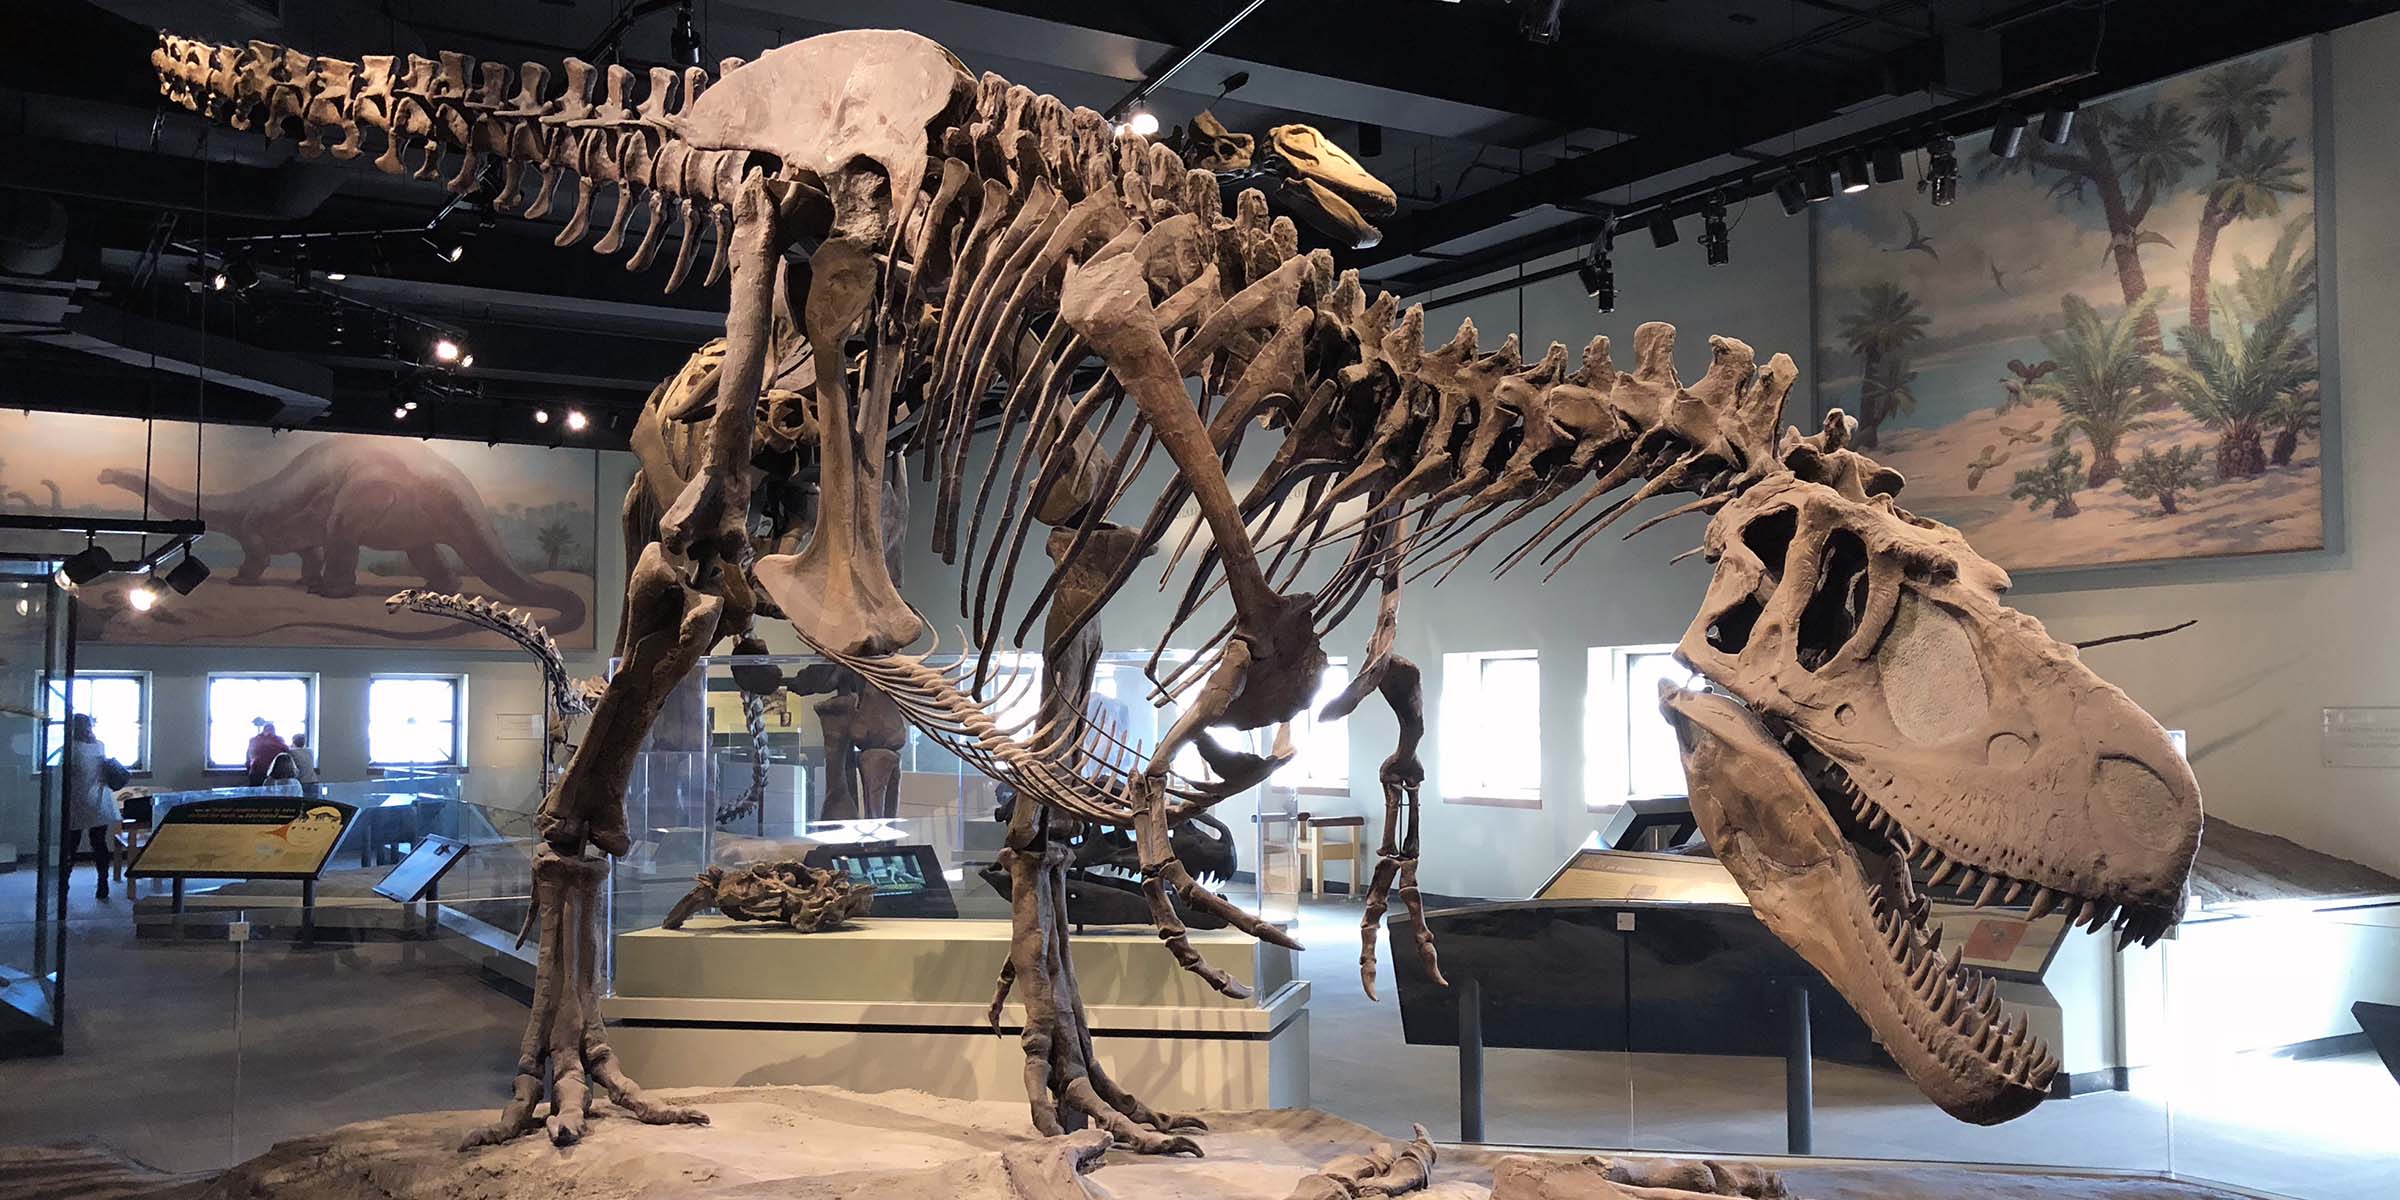 A large dinosaur skeleton standing on a brown surface and leaning forward menacingly, in a museum gallery